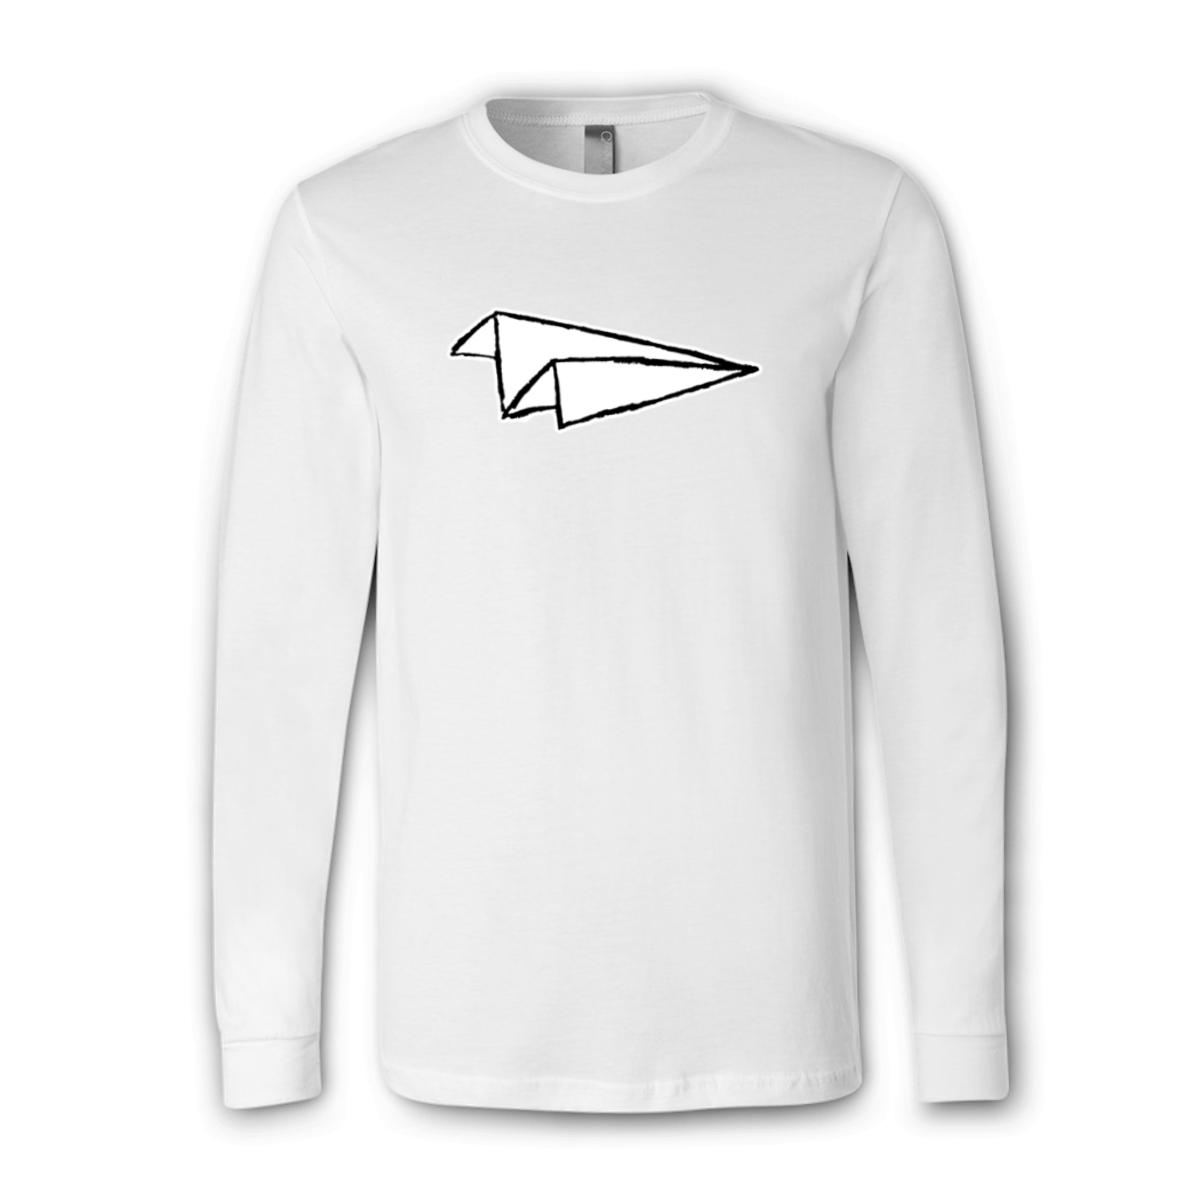 Airplane Sketch Unisex Long Sleeve Tee Small white